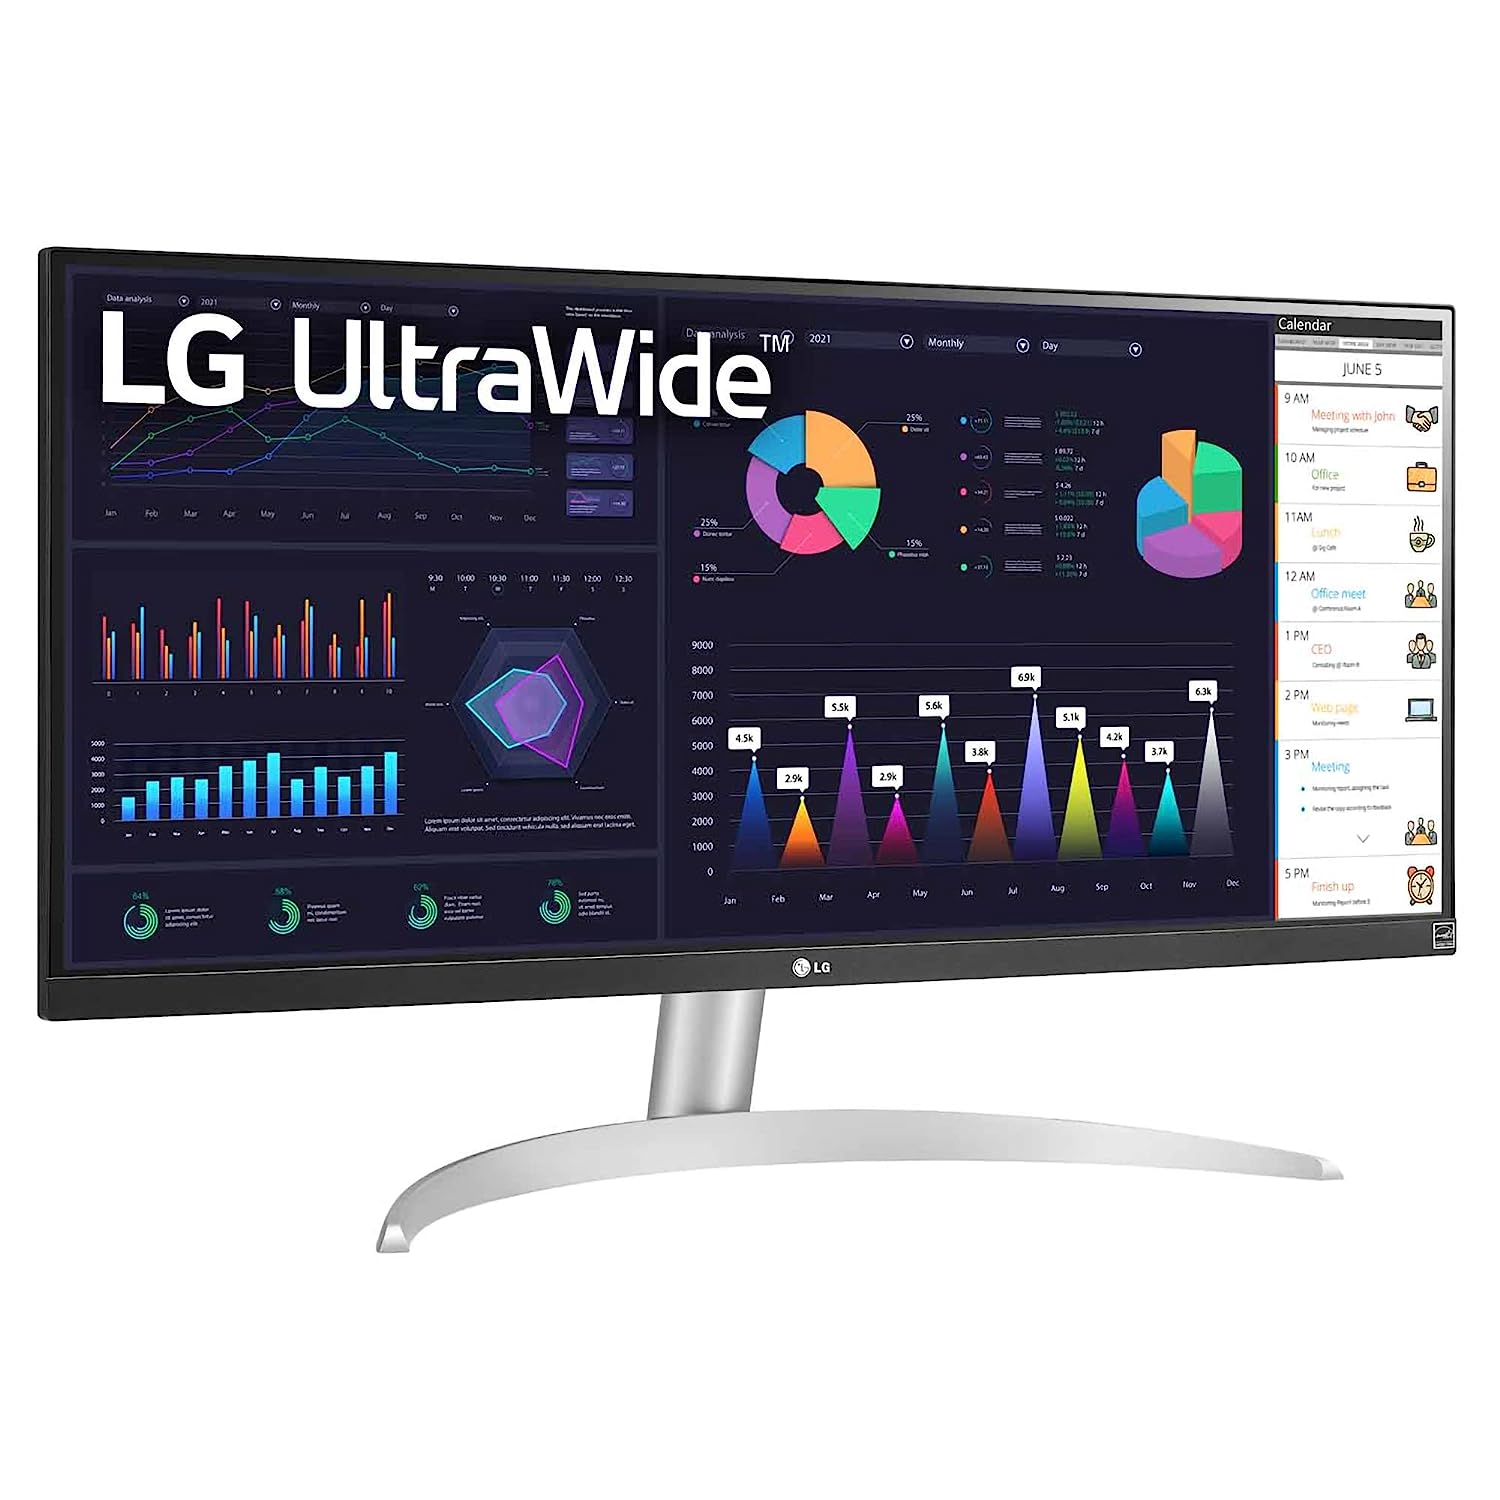 LG 29WQ600 UltraWide IPS Monitor 2560x1080 100Hz with HDMI, DP Port, and USB Type-C